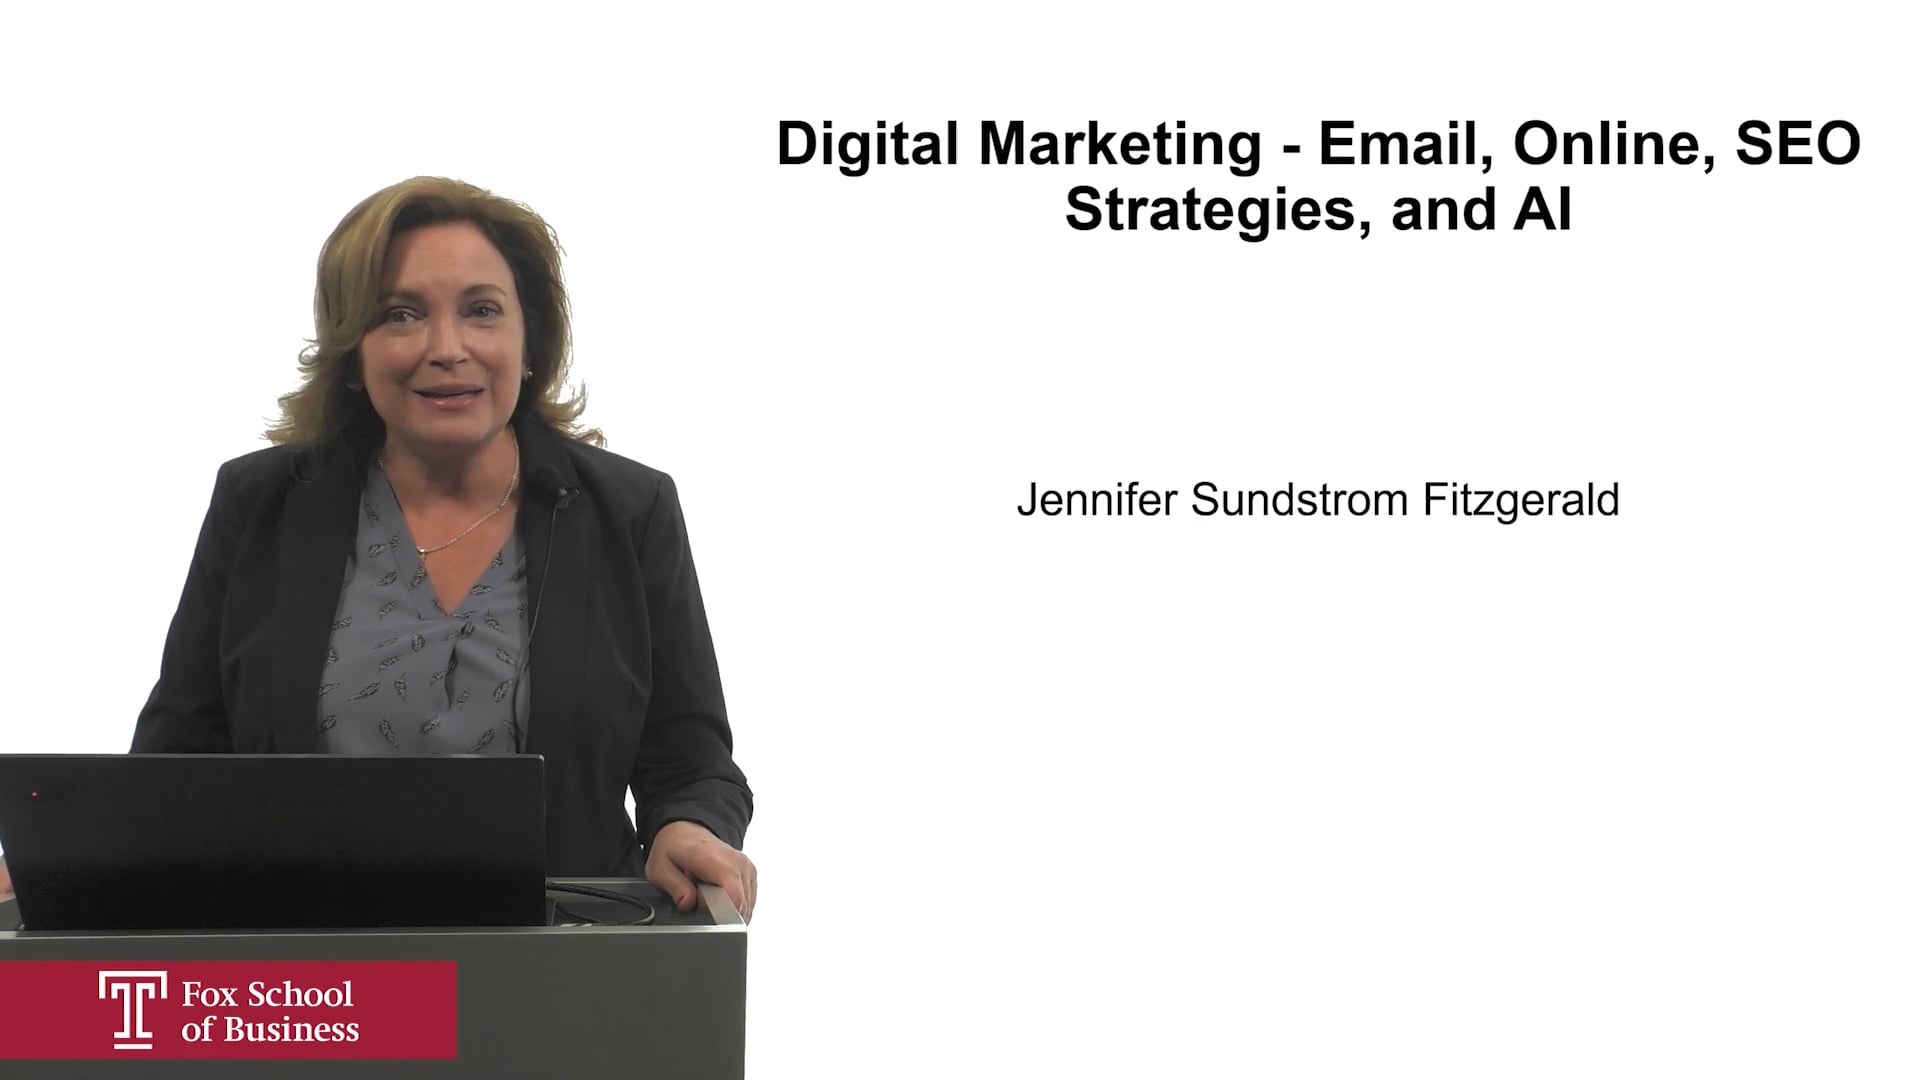 Digital Marketing Email, Online, and SEO Strategies